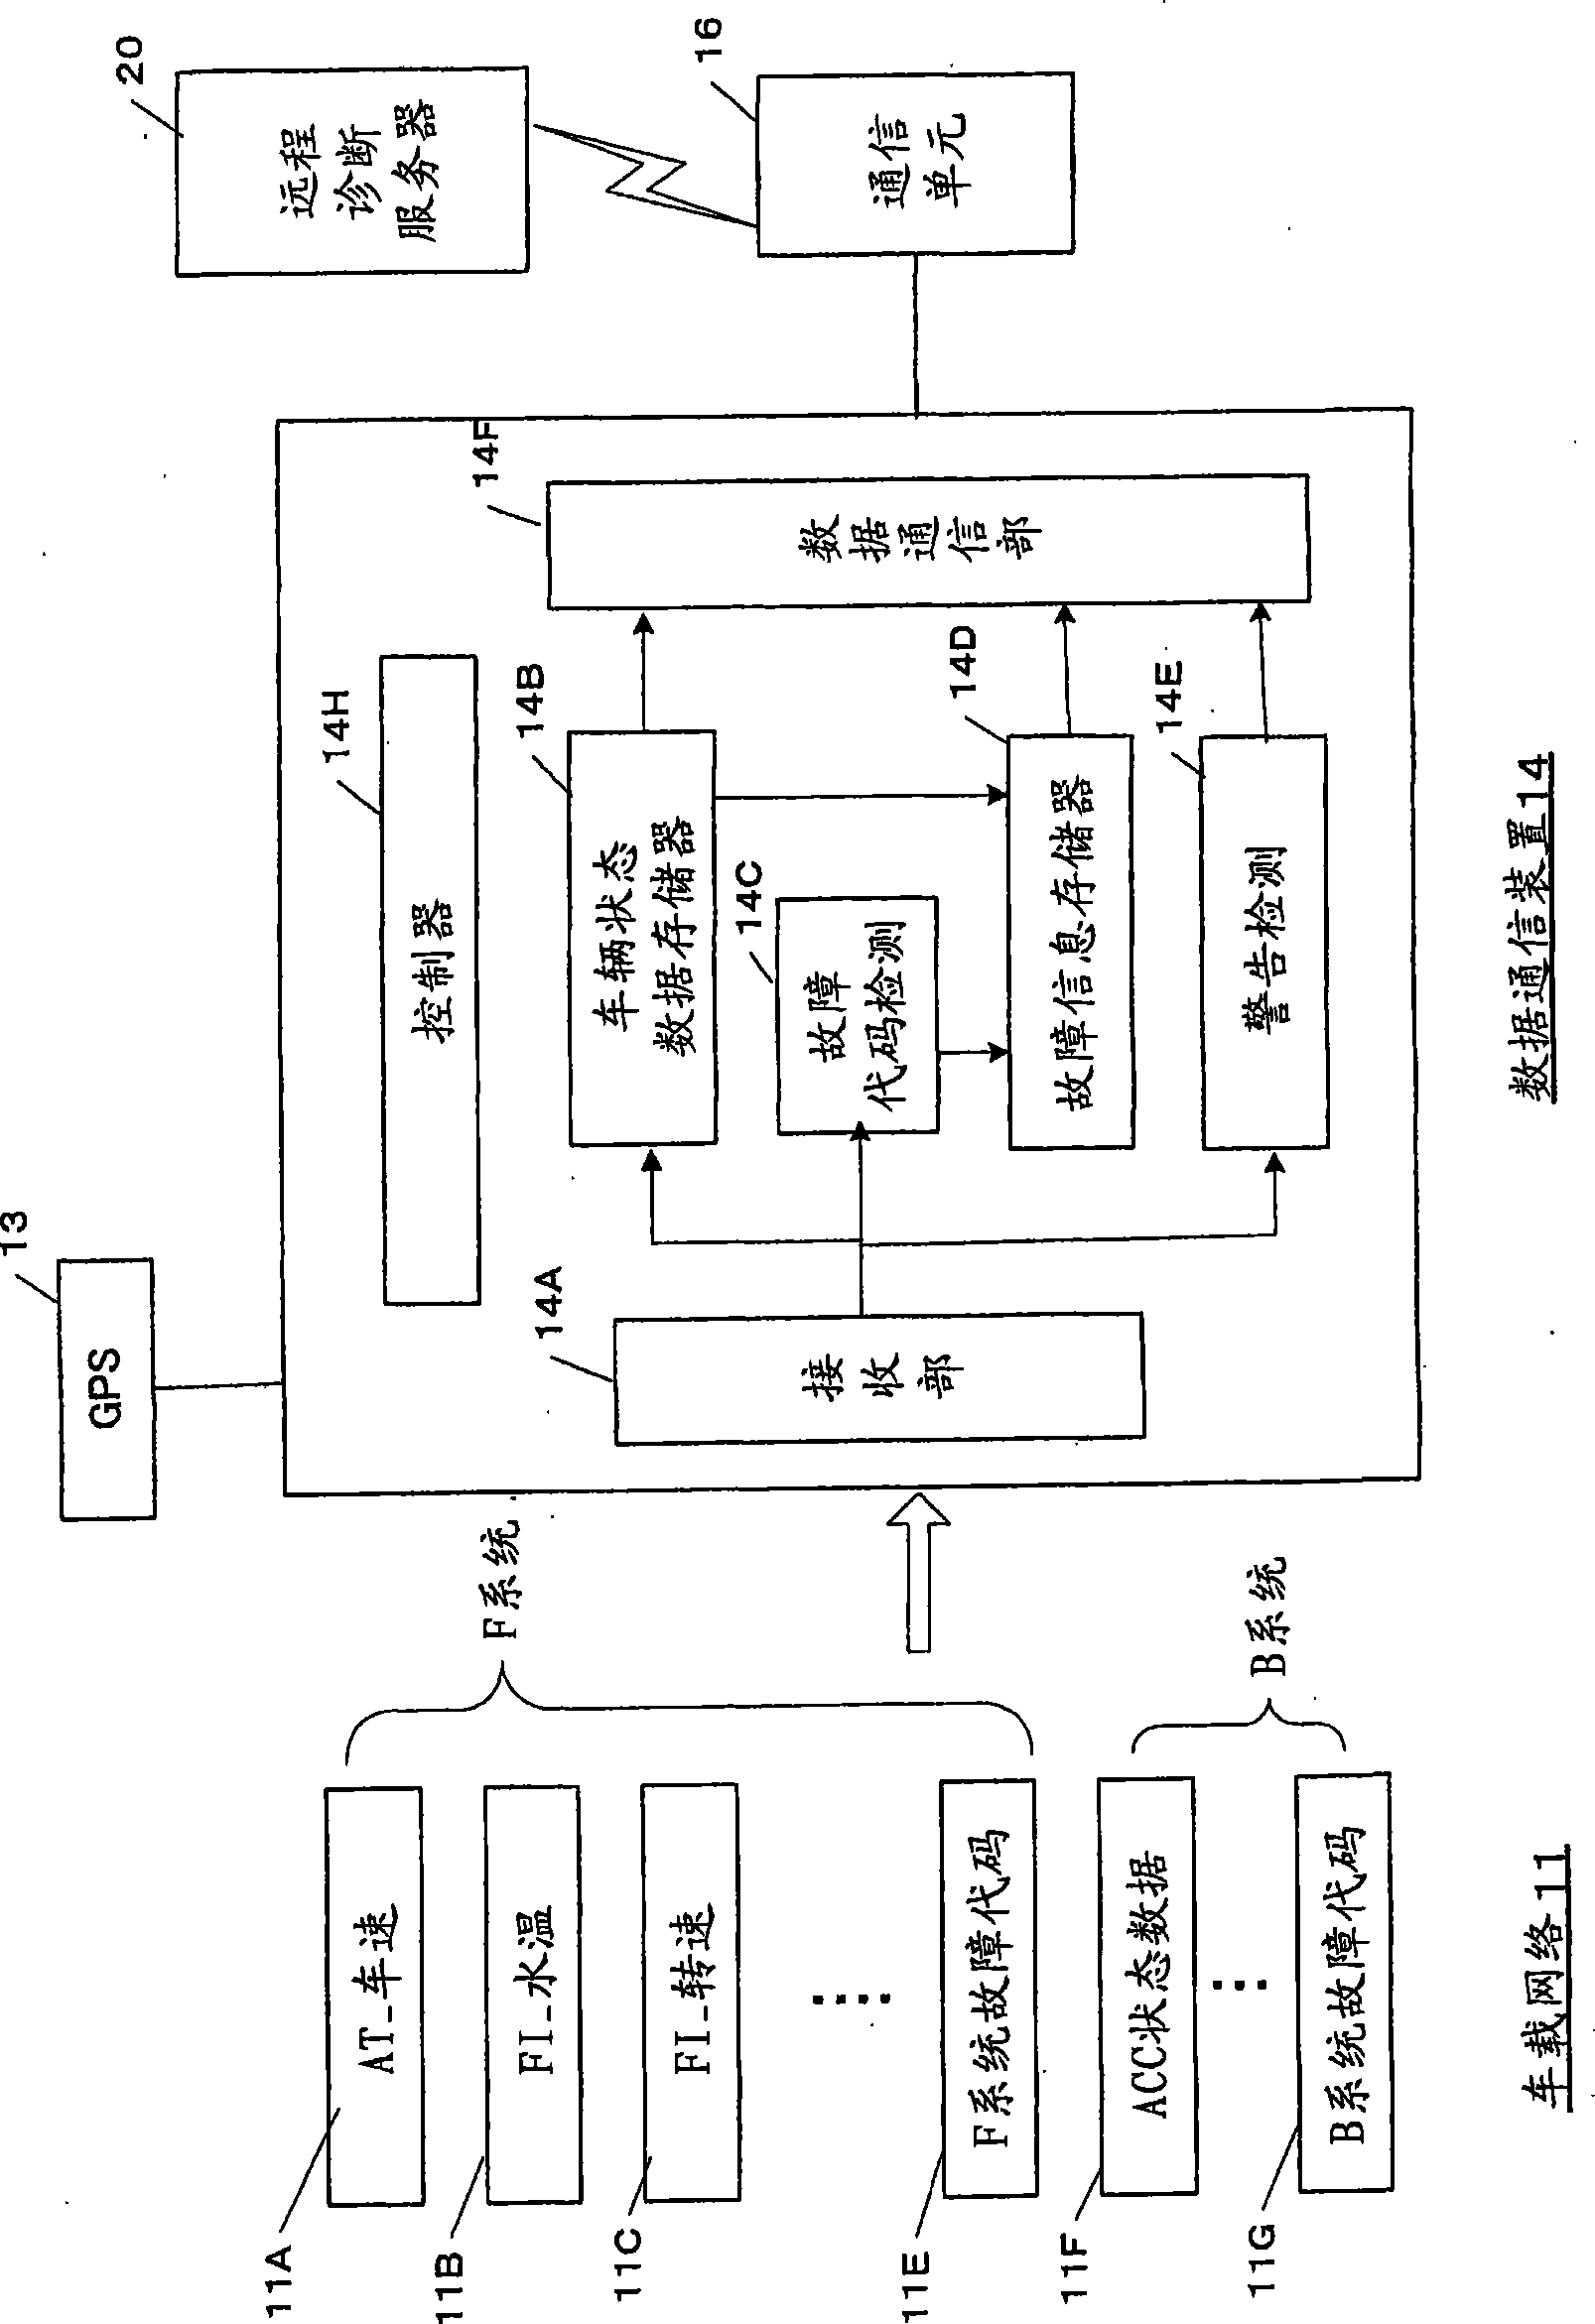 Data communication apparatus for vehicle remote control diagonosis system